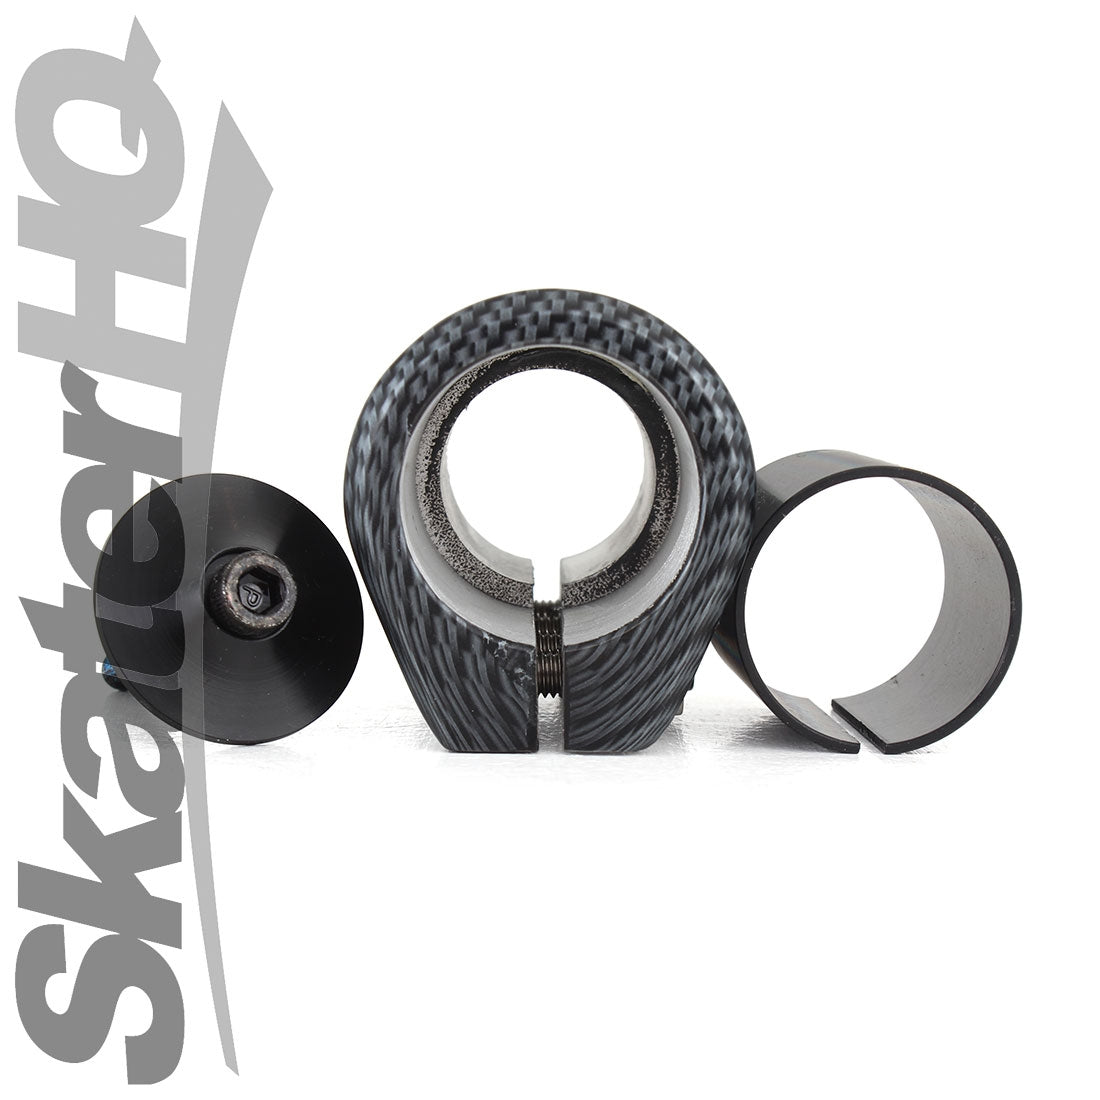 Sacrifice Spy SCS Quad Clamp - Carbon Fade Scooter Headsets and Clamps